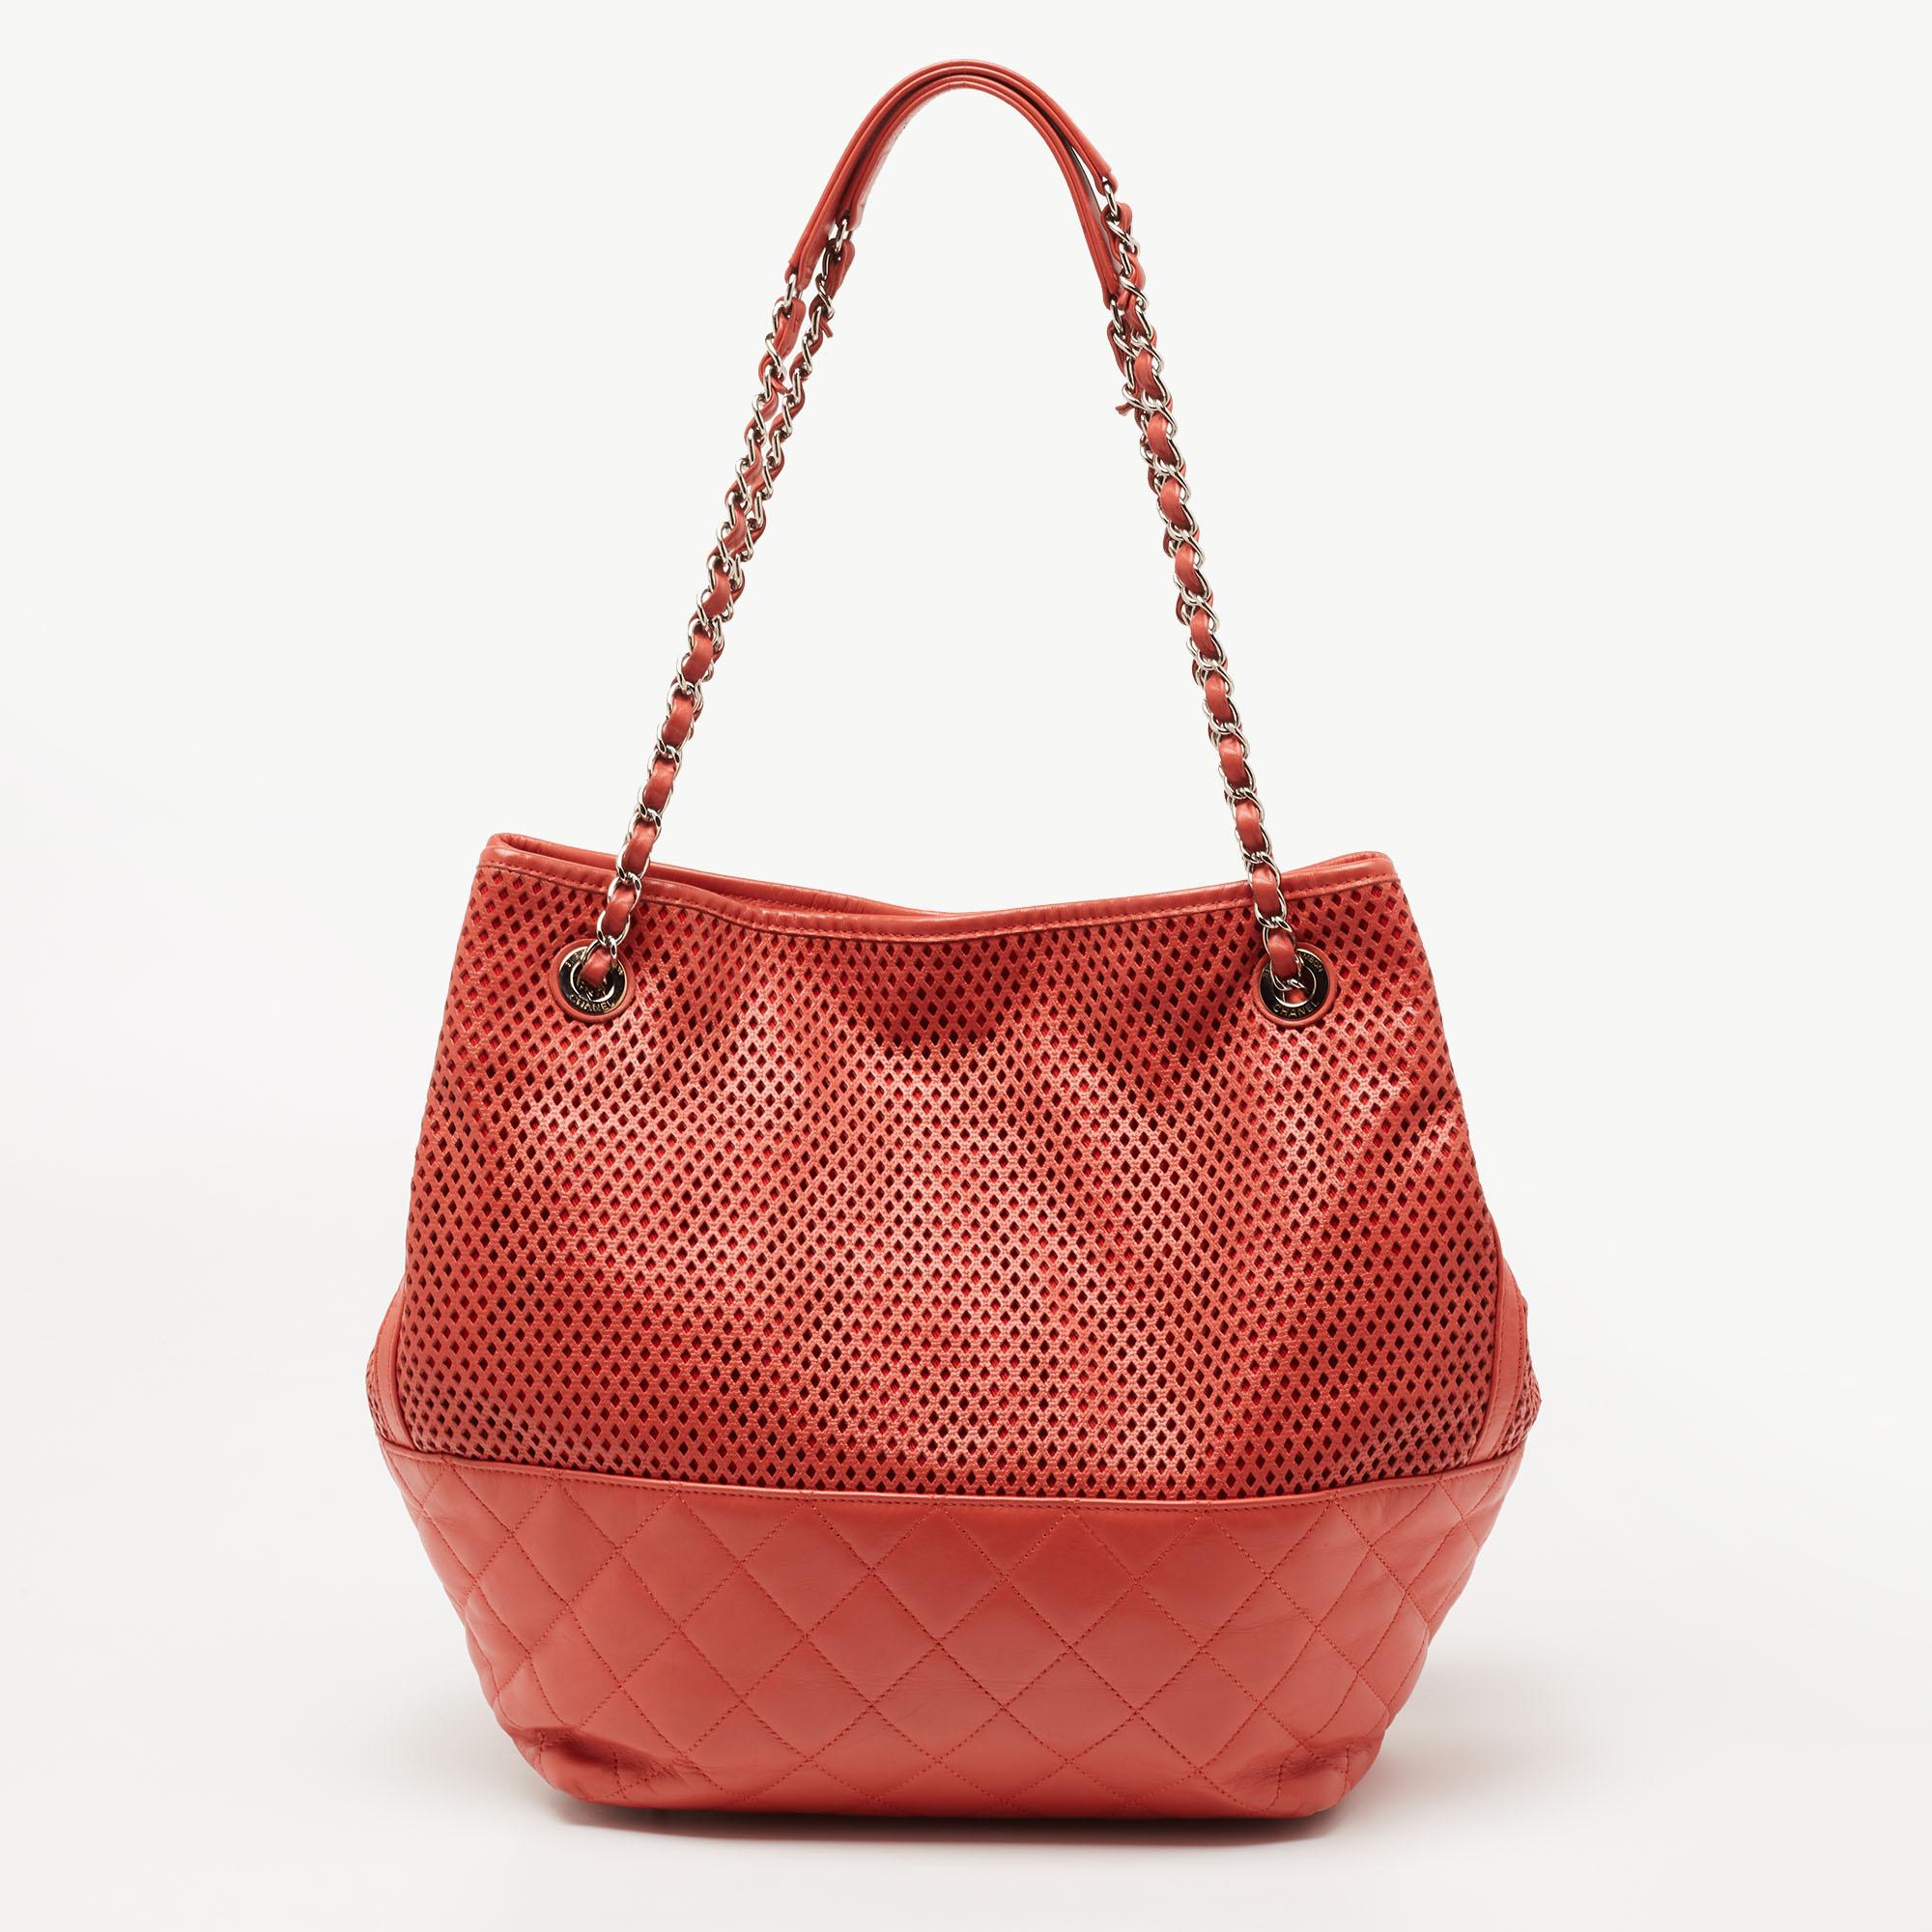 Emanating luxe vibes and gracefulness with its creative design, this Up In The Air tote from Chanel proves to be an eye-catching everyday accessory. It is crafted from orange perforated leather and features gold-tone hardware, chain straps, and a